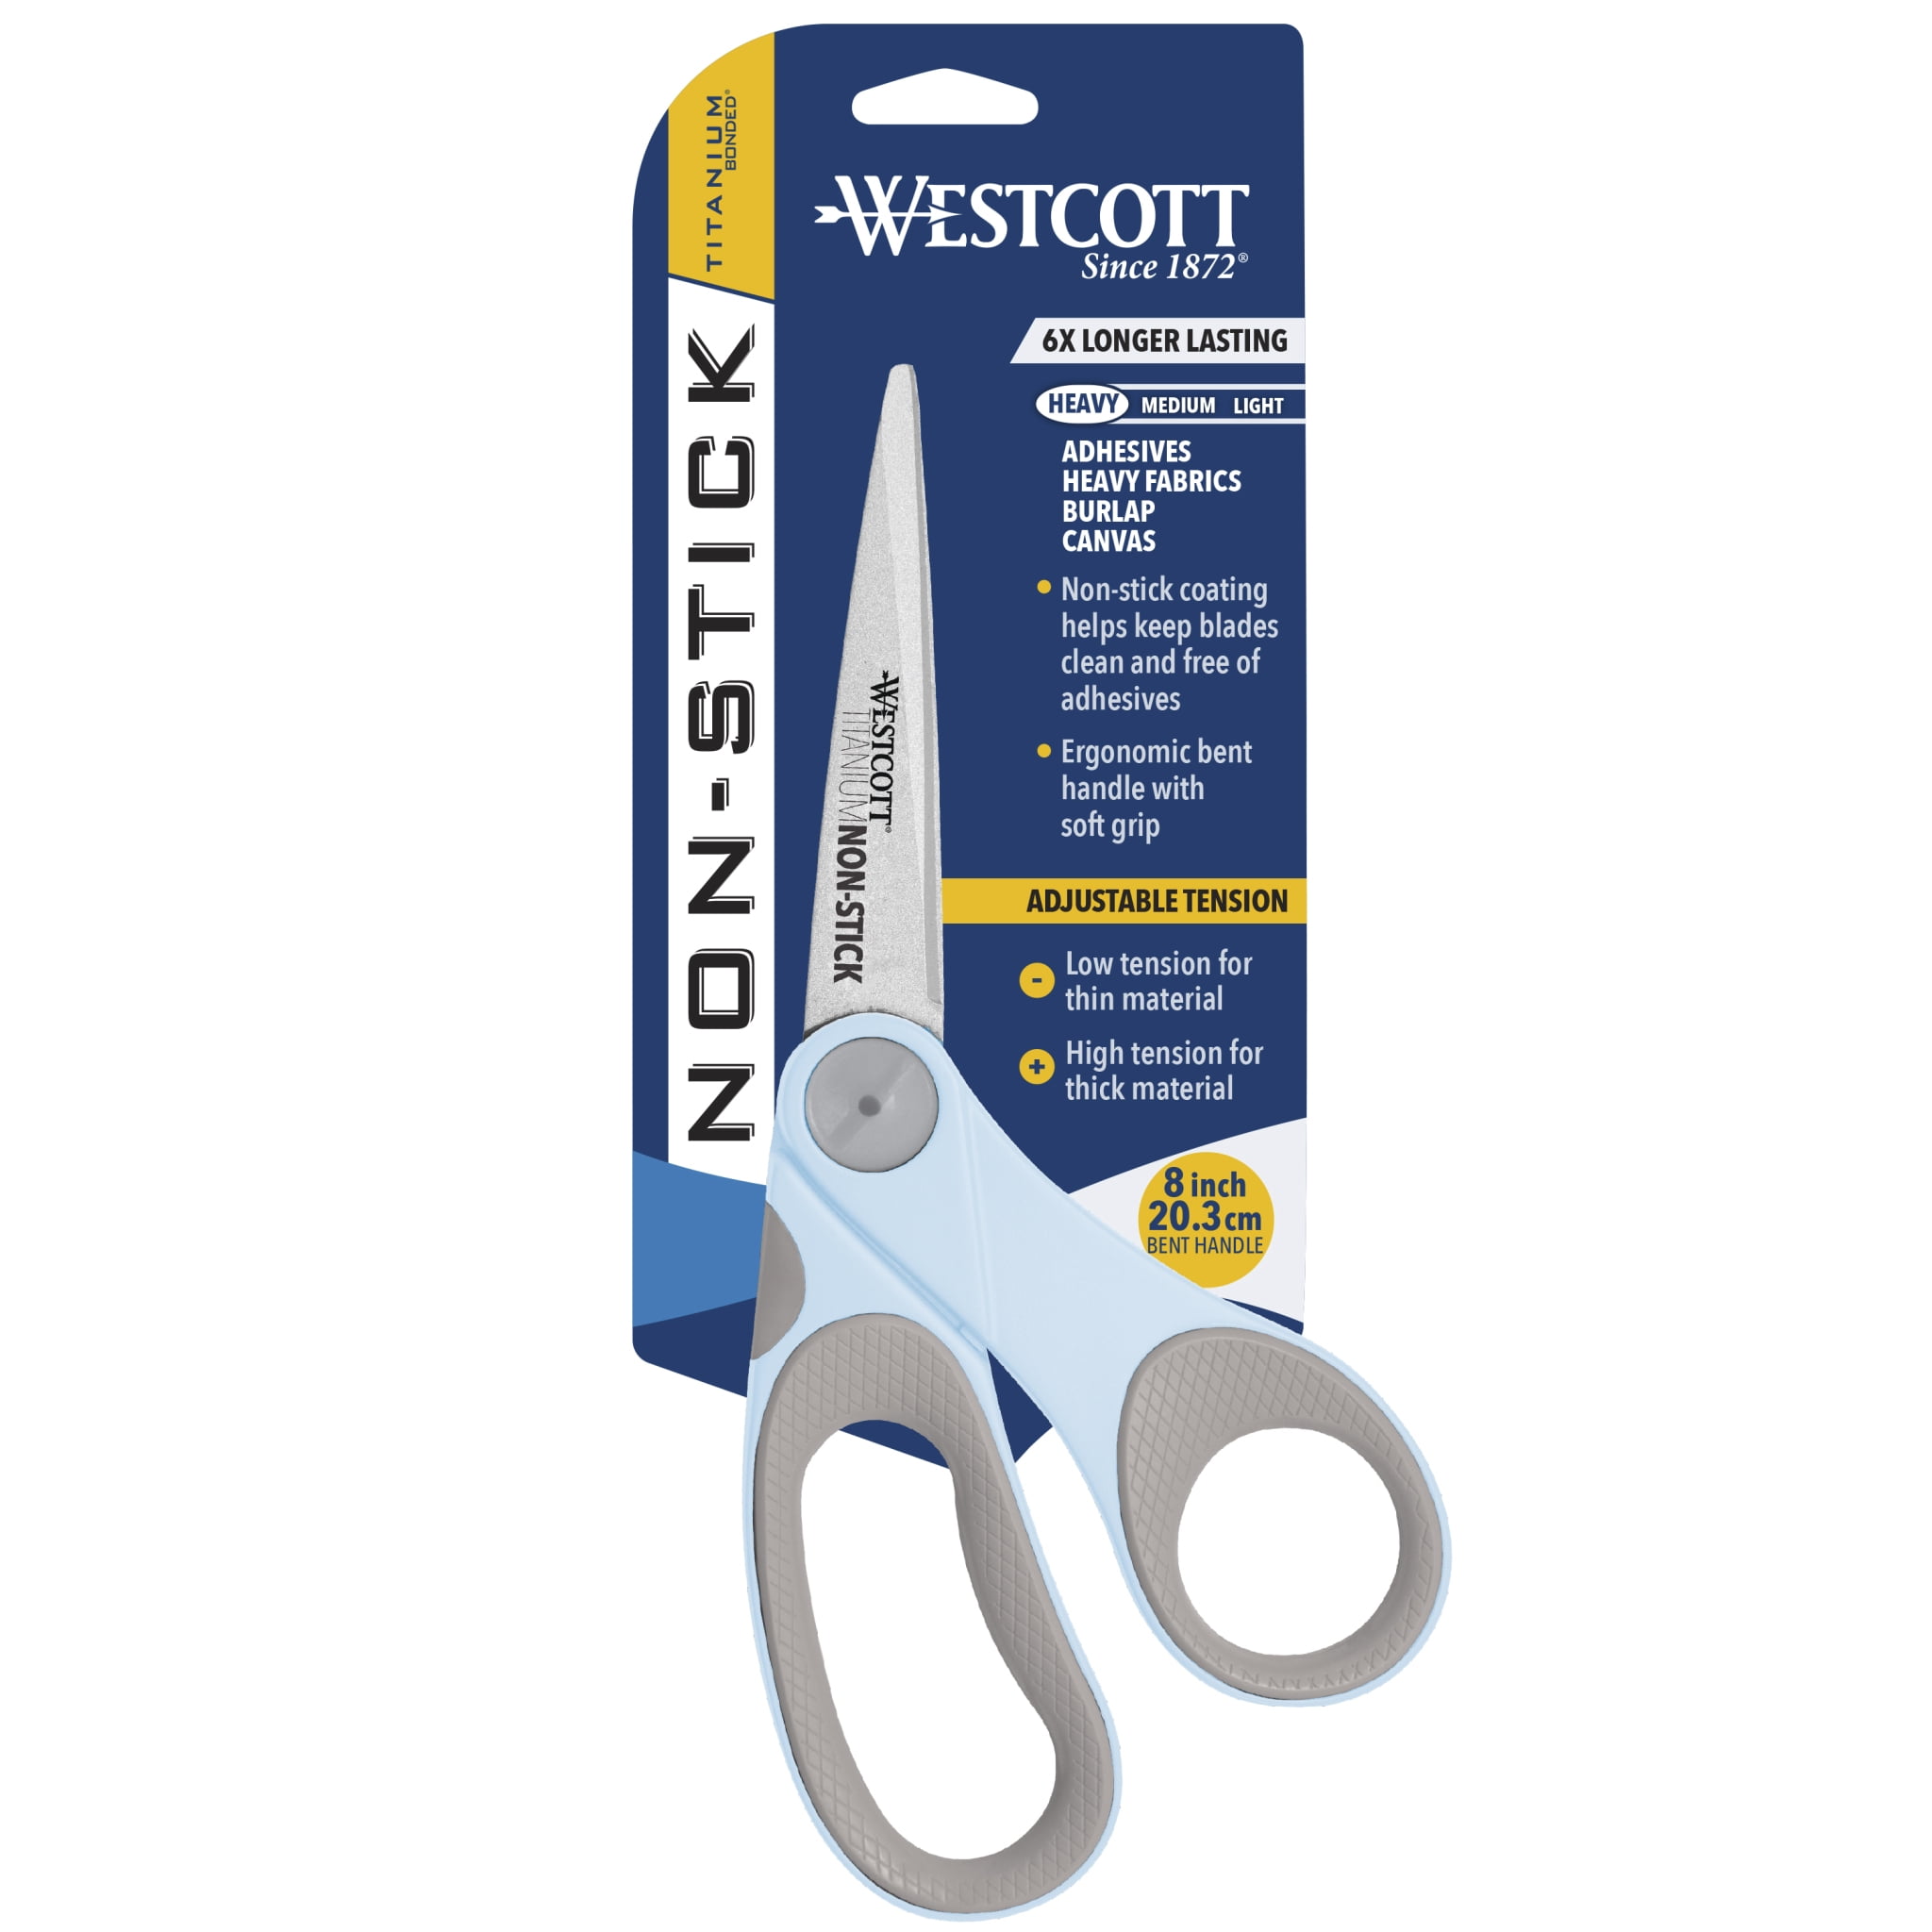 Westcott Titanium Bonded Scissors, 7, Micro-tip, for Craft, Light Blue,  1-Count - DroneUp Delivery